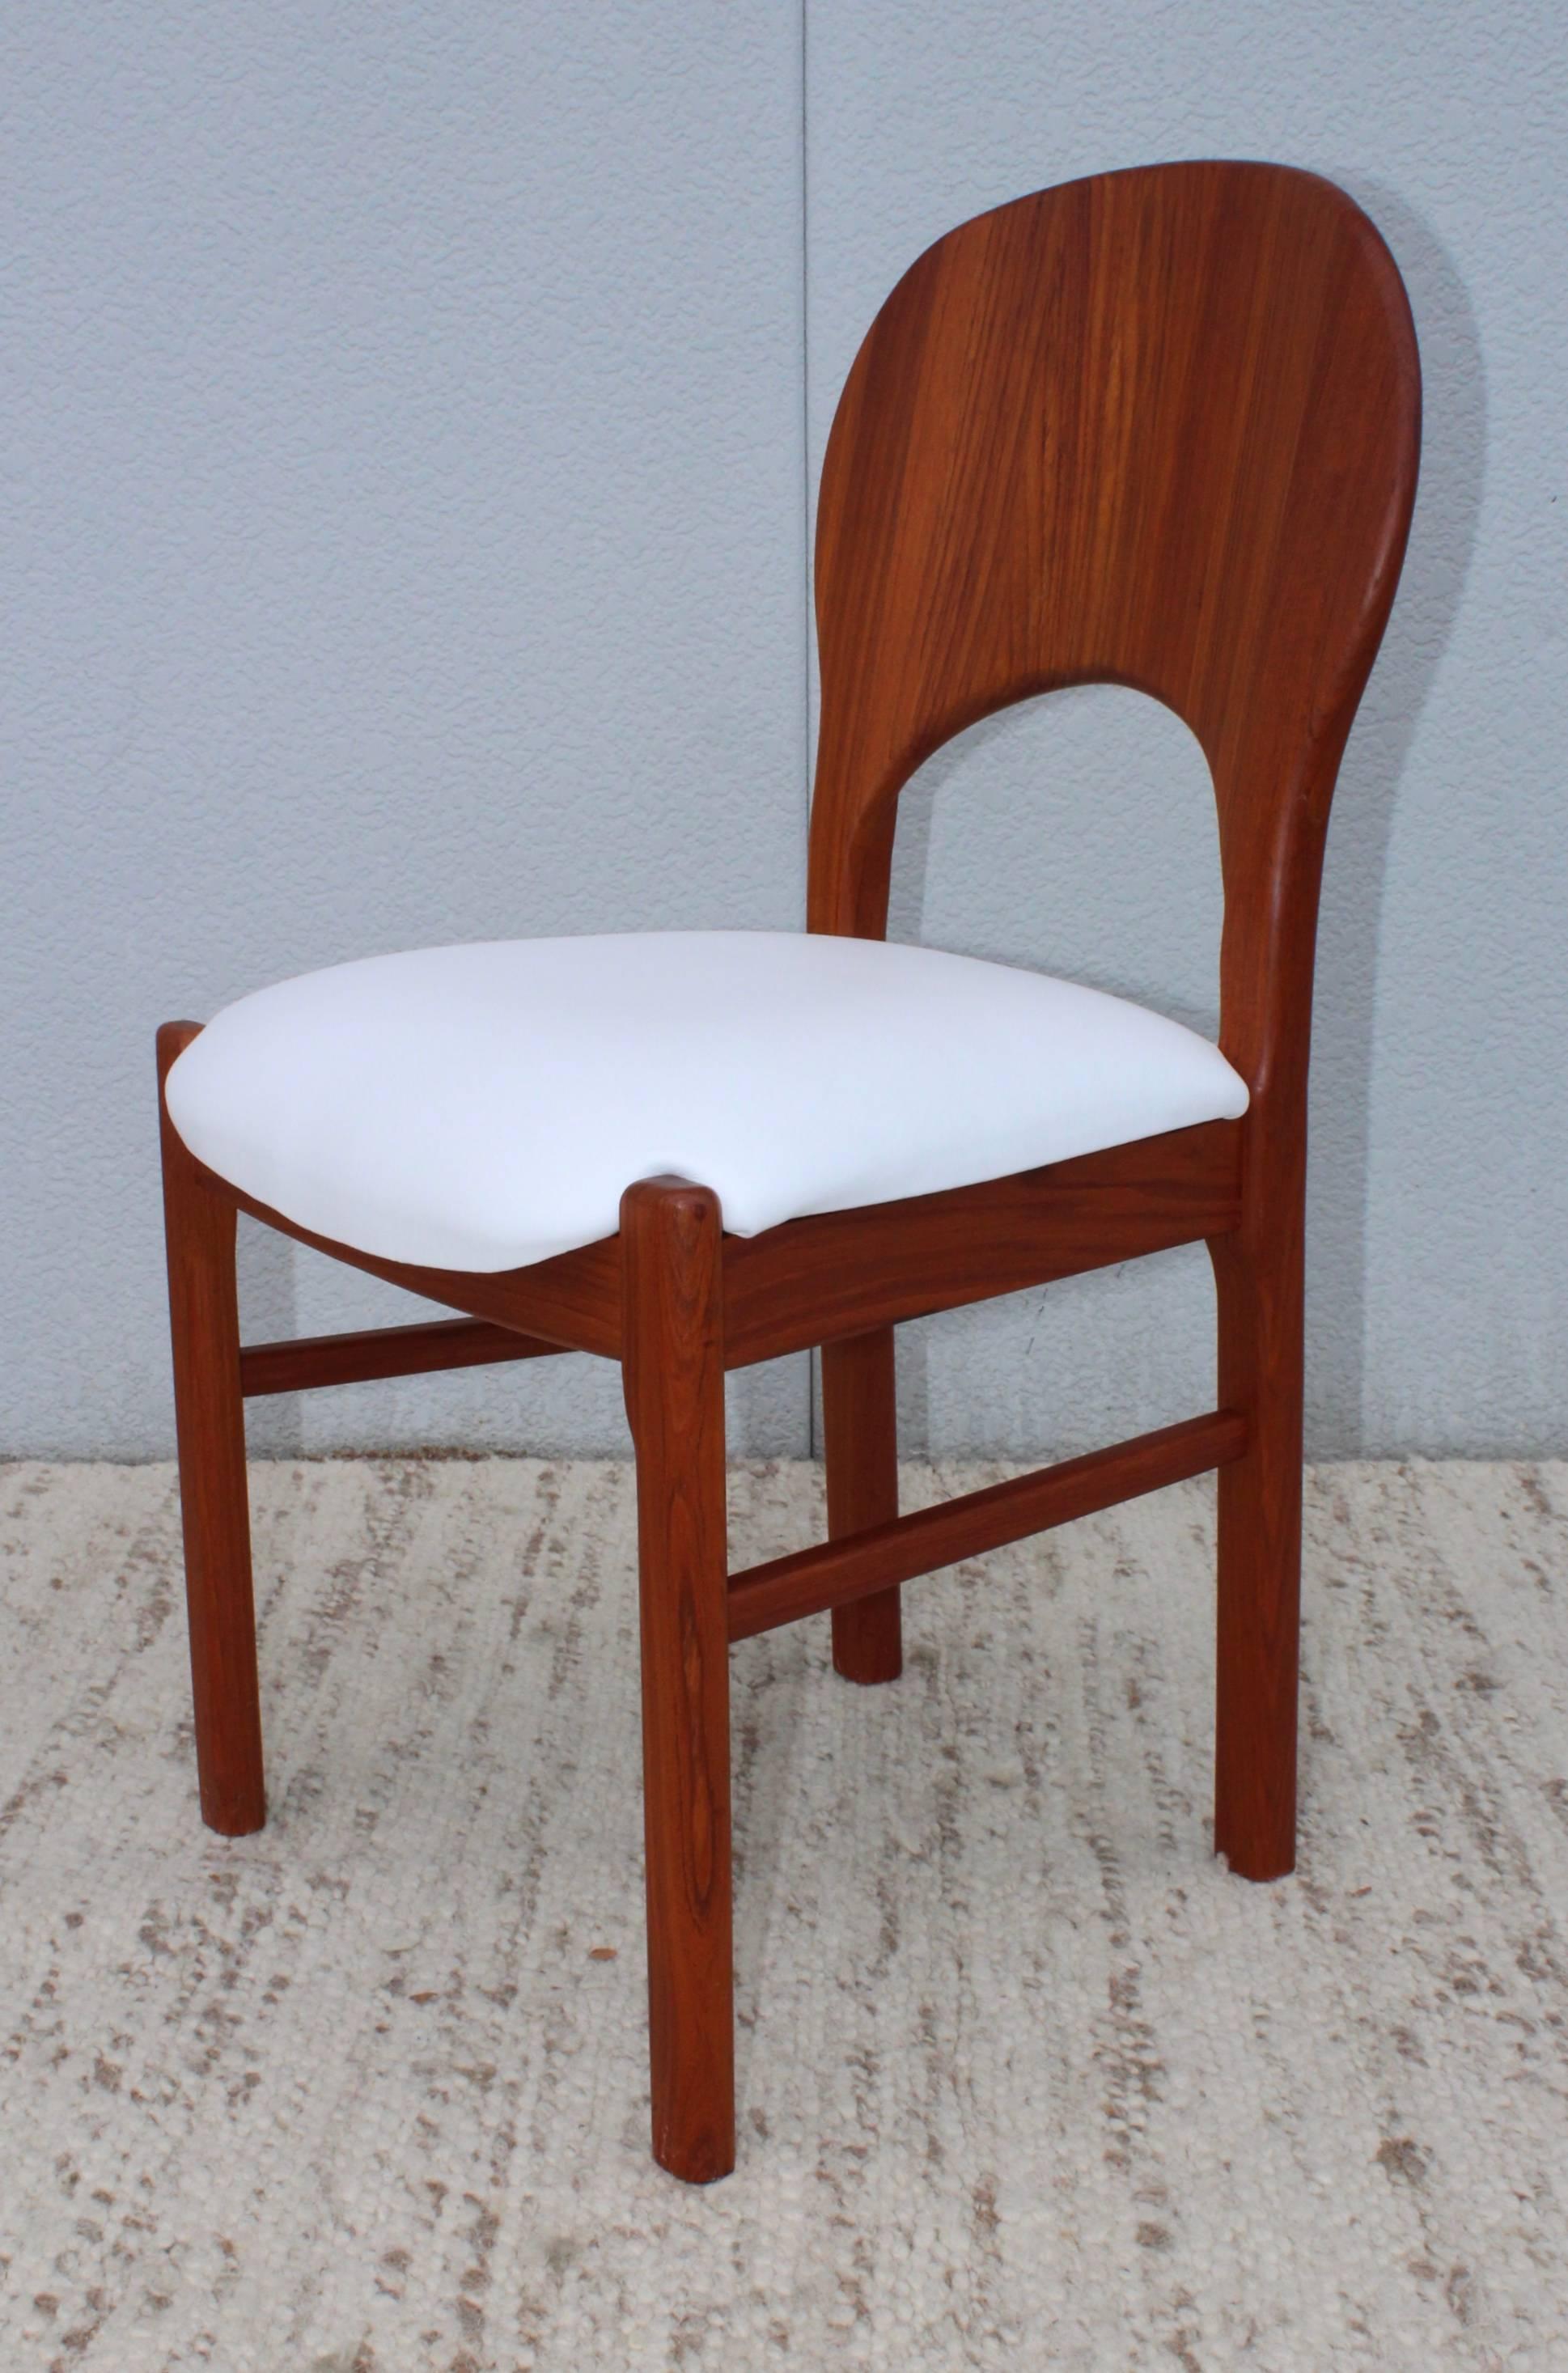 Thai Rare Benny Linden Teak and Leather Dining Chairs